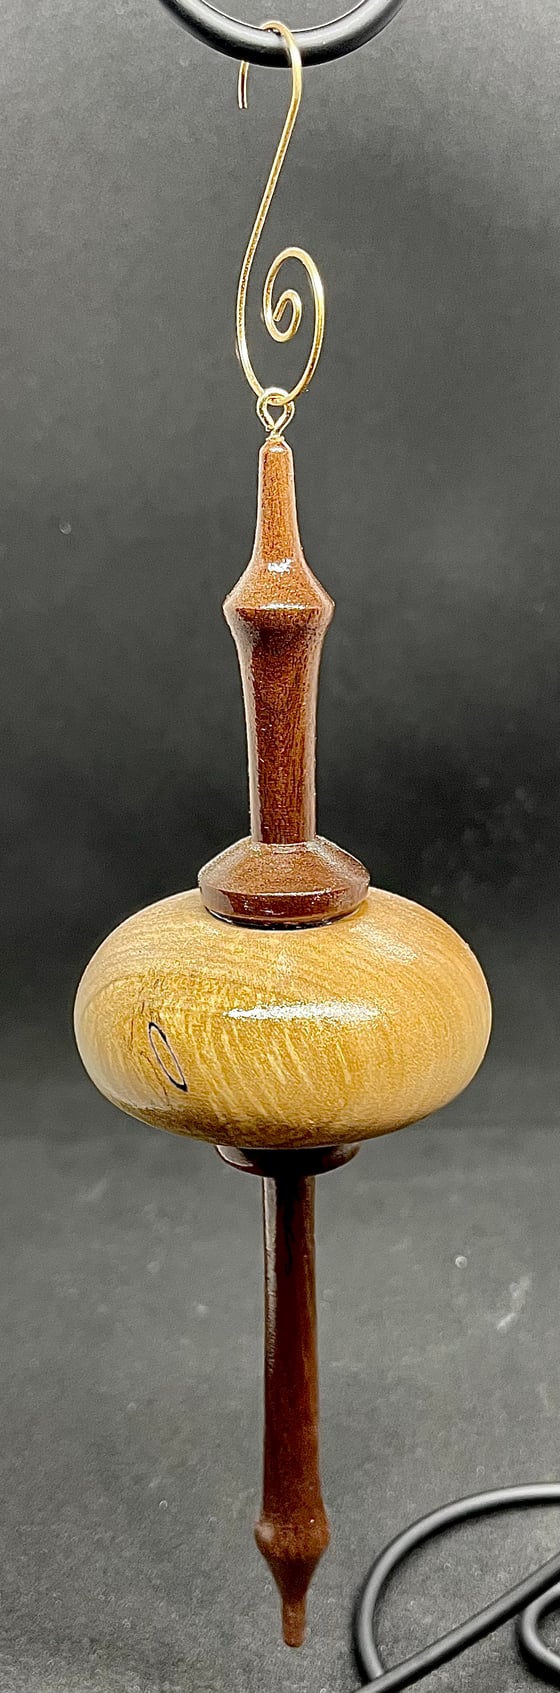 Image of Hollow Form Ornament Maple & Walnut 2